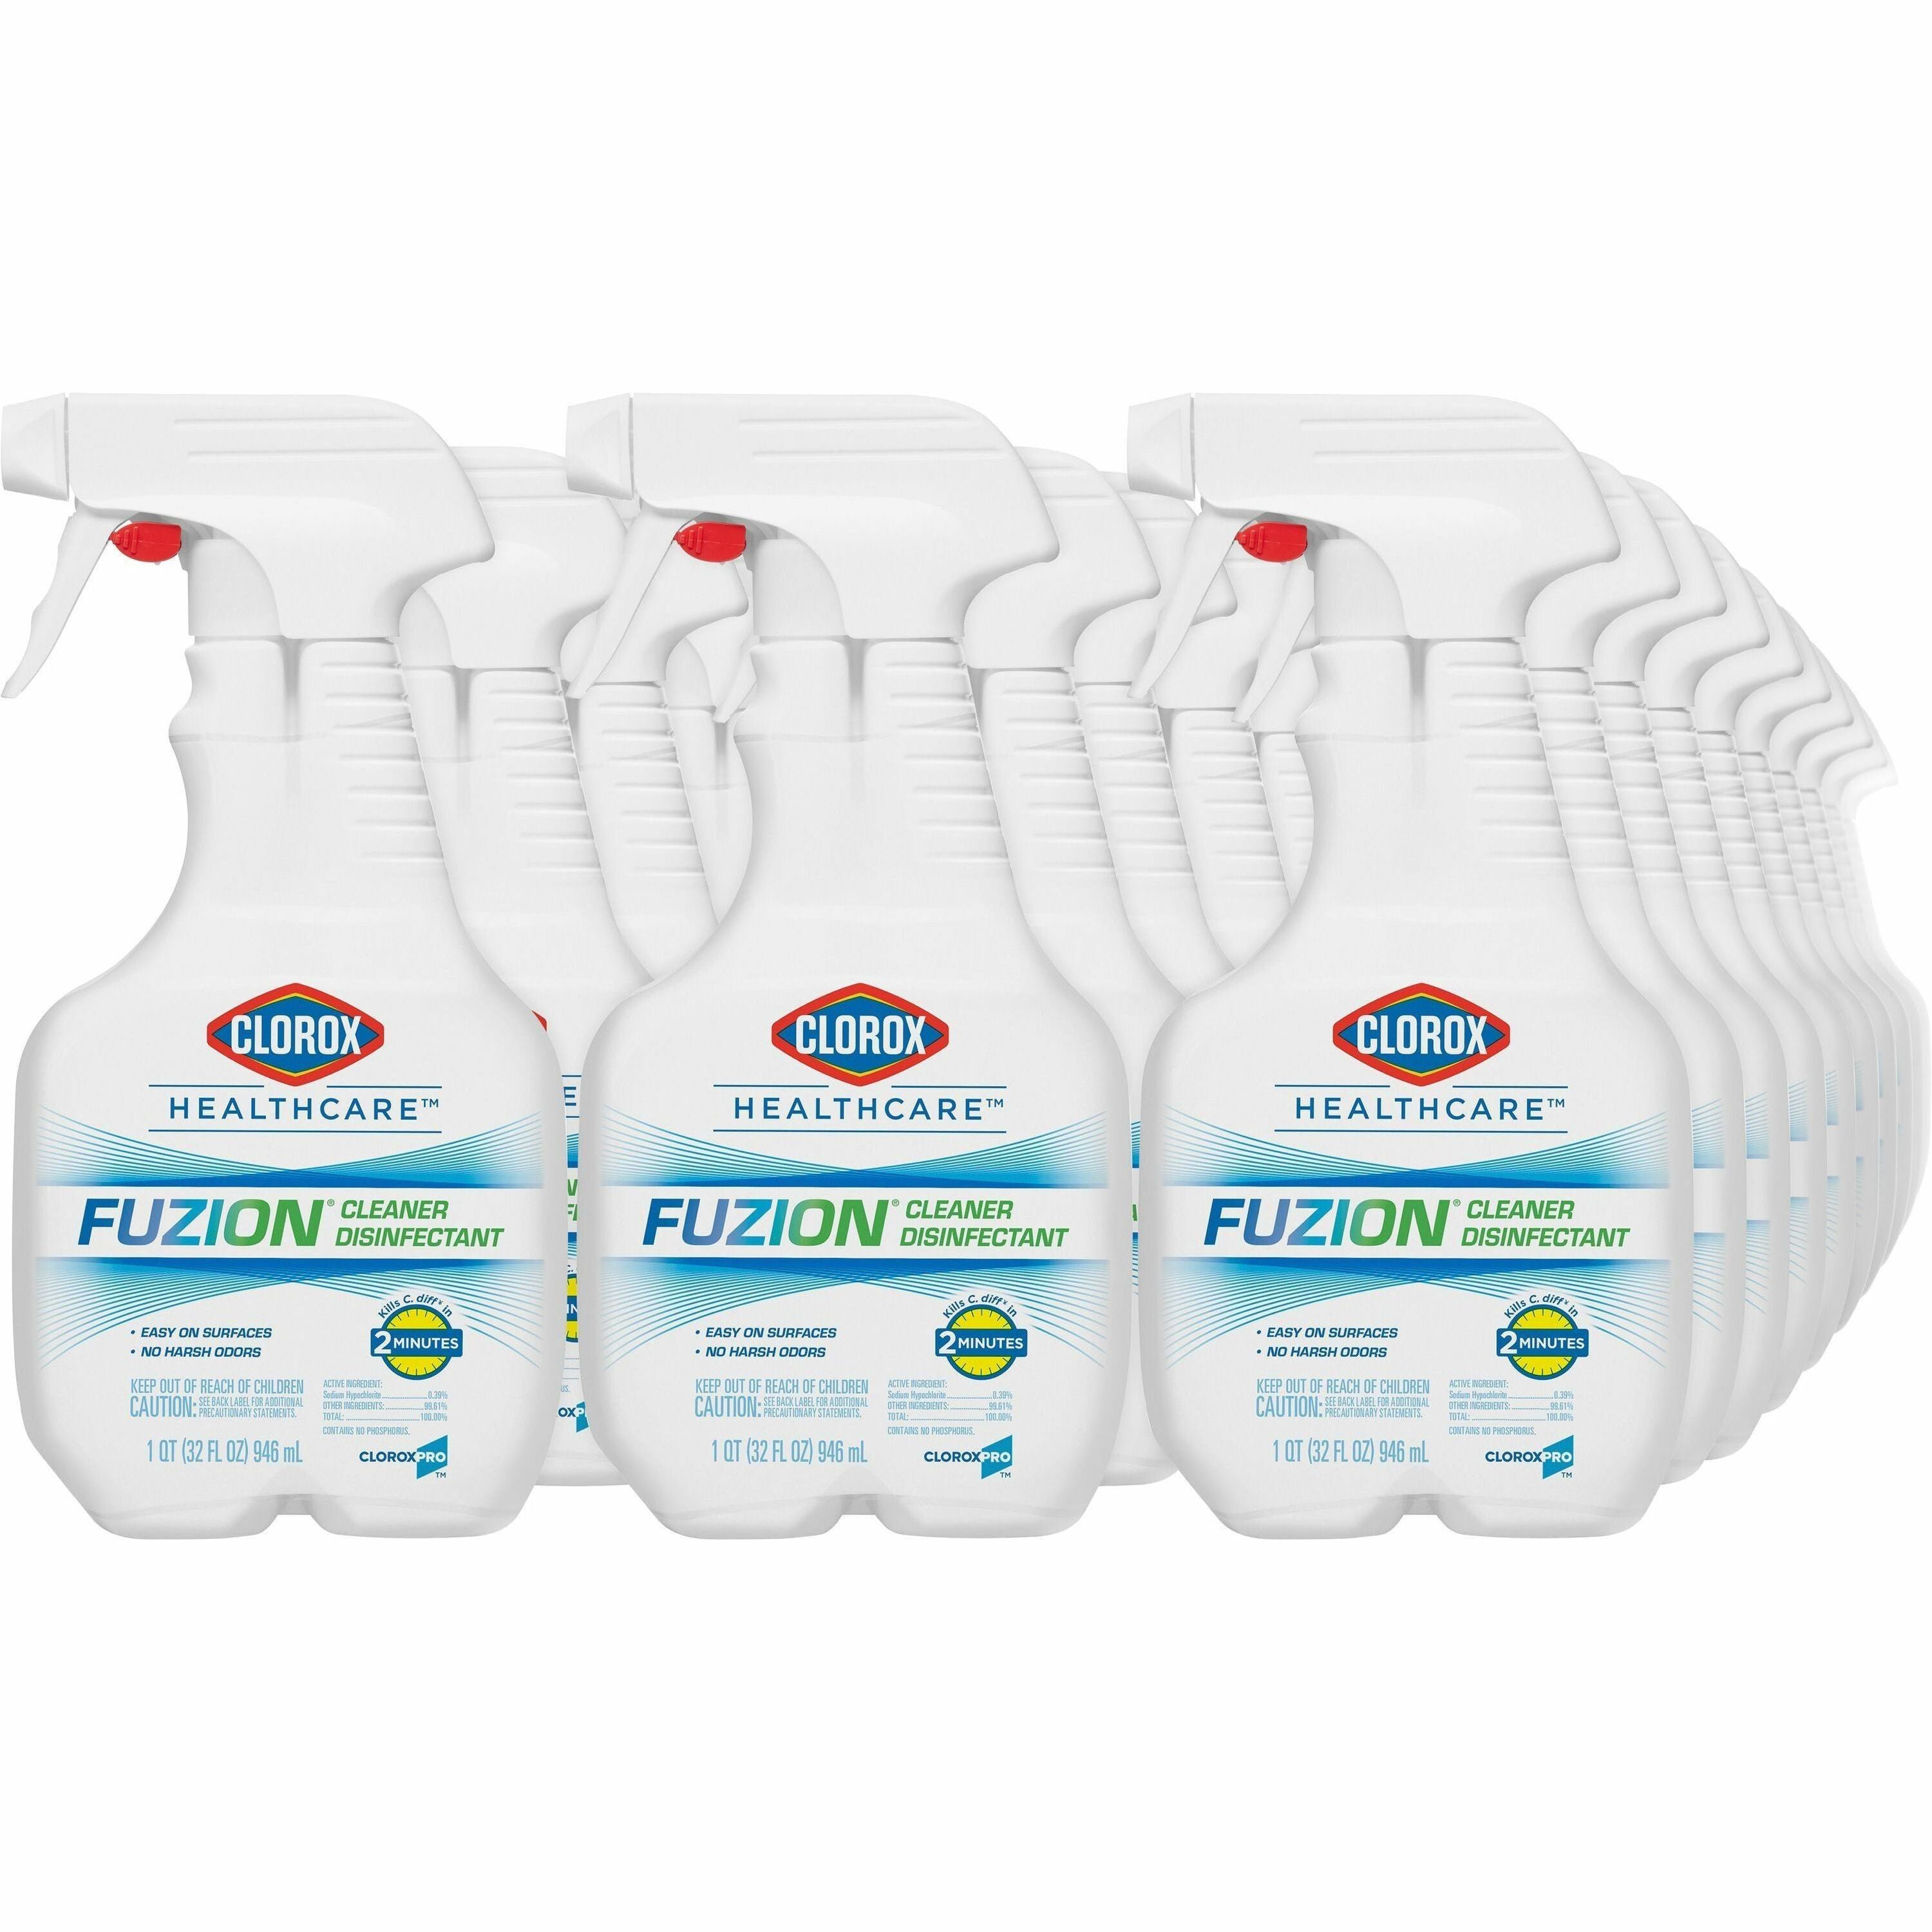 Clorox Fuzion Cleaner Disinfectant - Ready-To-Use - 32 fl oz (1 quart)Bottle - 216 / Bundle - Low Odor, Odor Neutralizer, Easy to Use - Translucent - 1